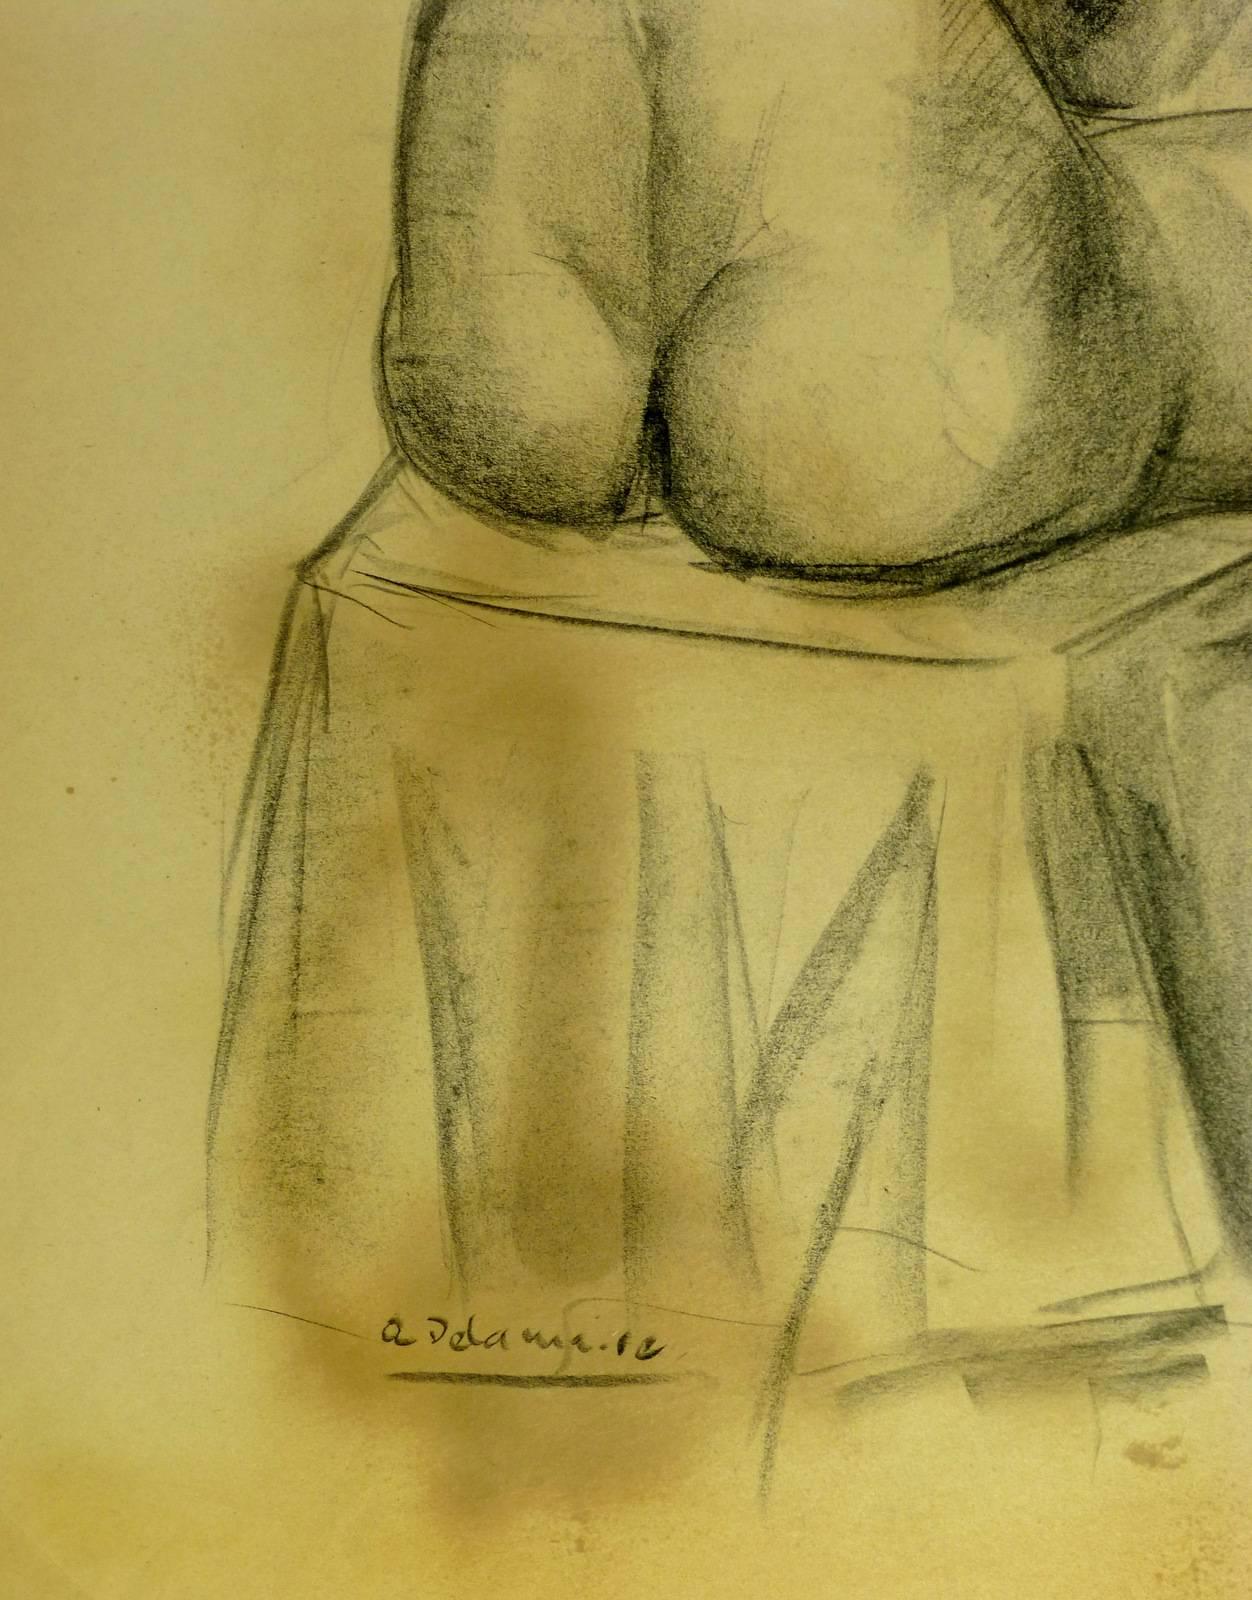 Delightful nude charcoal sketch of back of figure seated on a draped chair by French artist A. Delamaire, circa 1930. 

Original artwork on paper displayed on a white mat with a gold border. Mat fits a standard-size frame.  Archival plastic sleeve